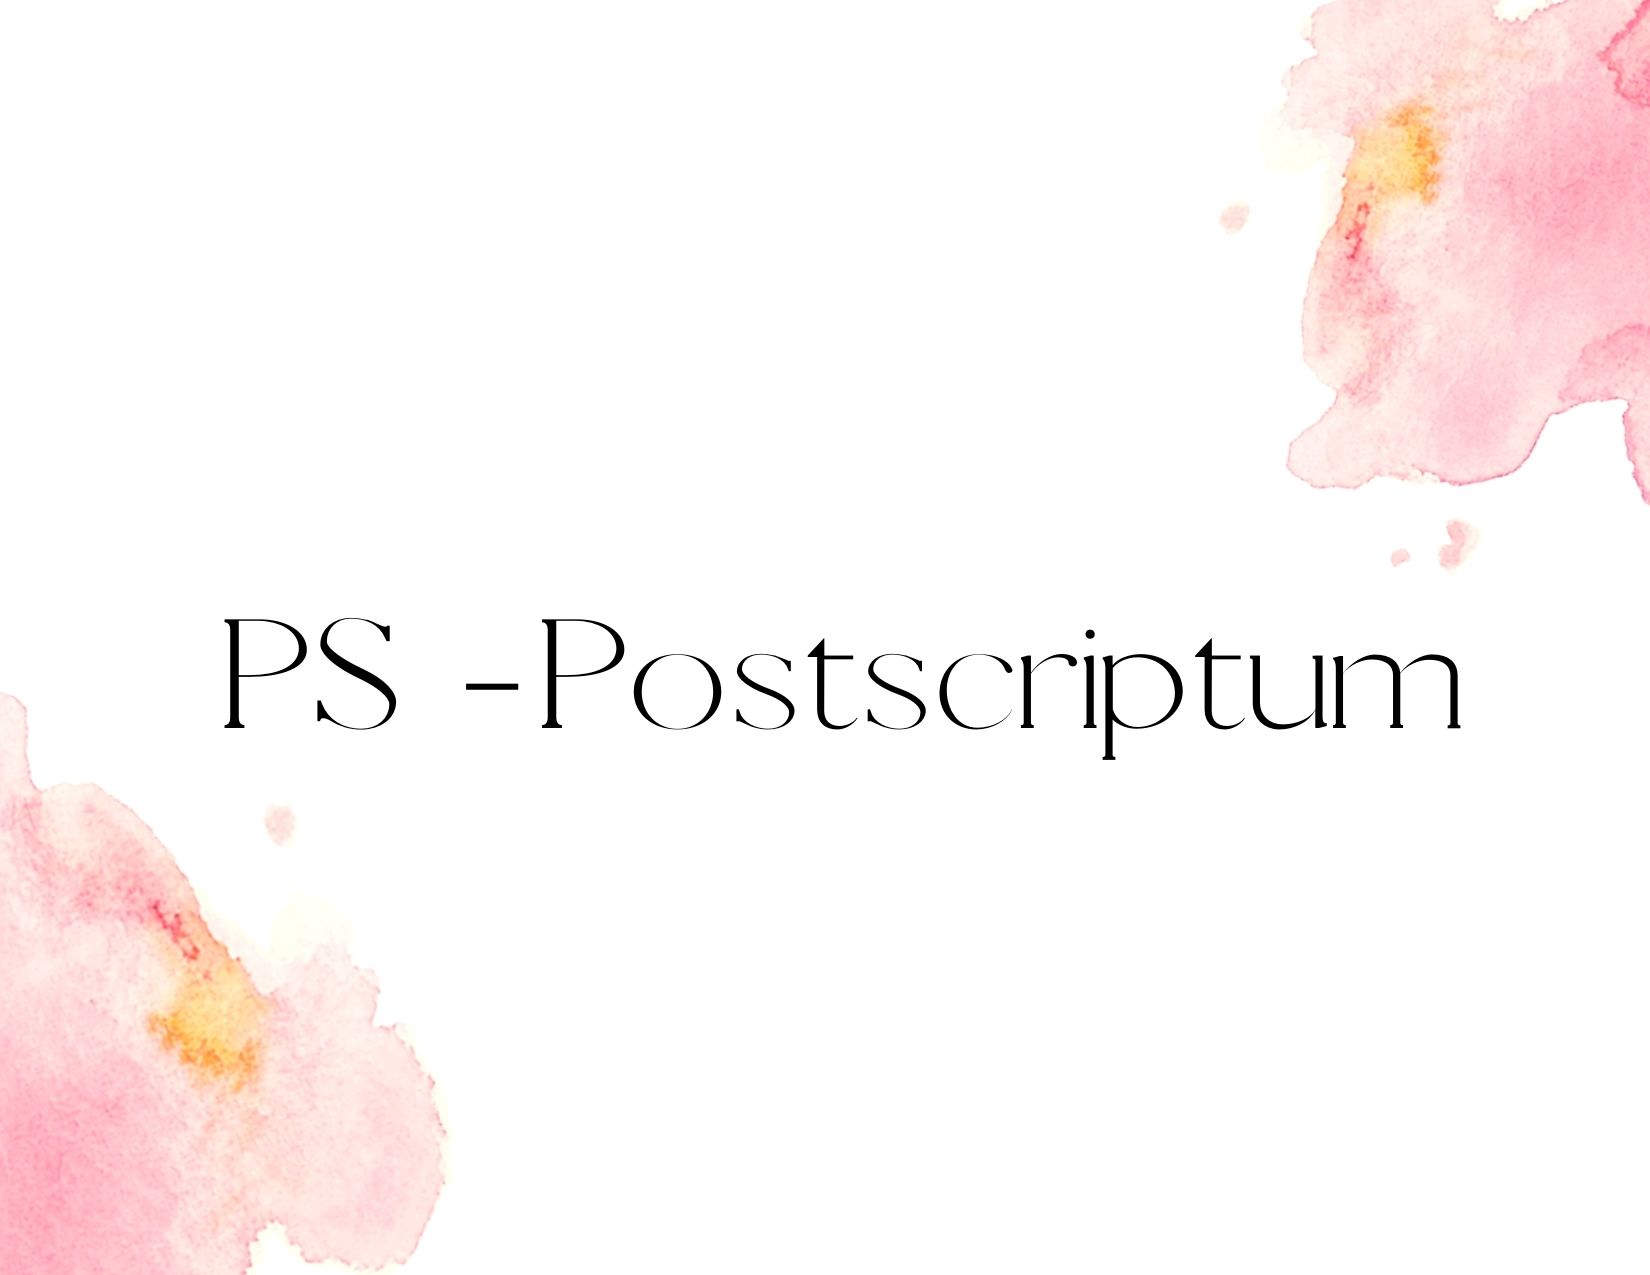 graphic answering the question "what does ps mean" by showing ps - postscriptum